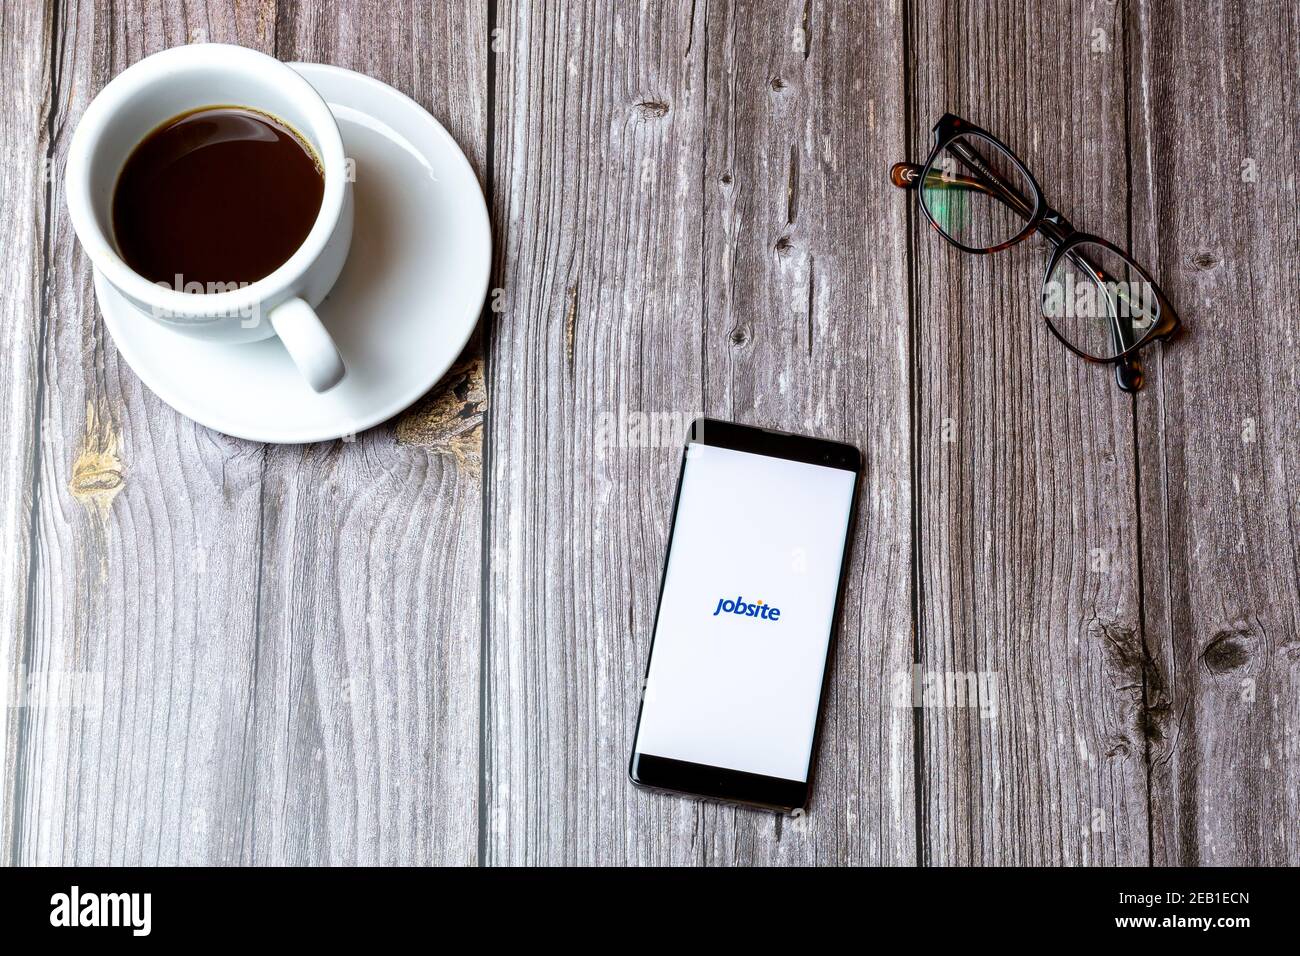 A mobile phone or cell phone laid on a wooden table with the Jobsite app open on screen next to a coffee Stock Photo